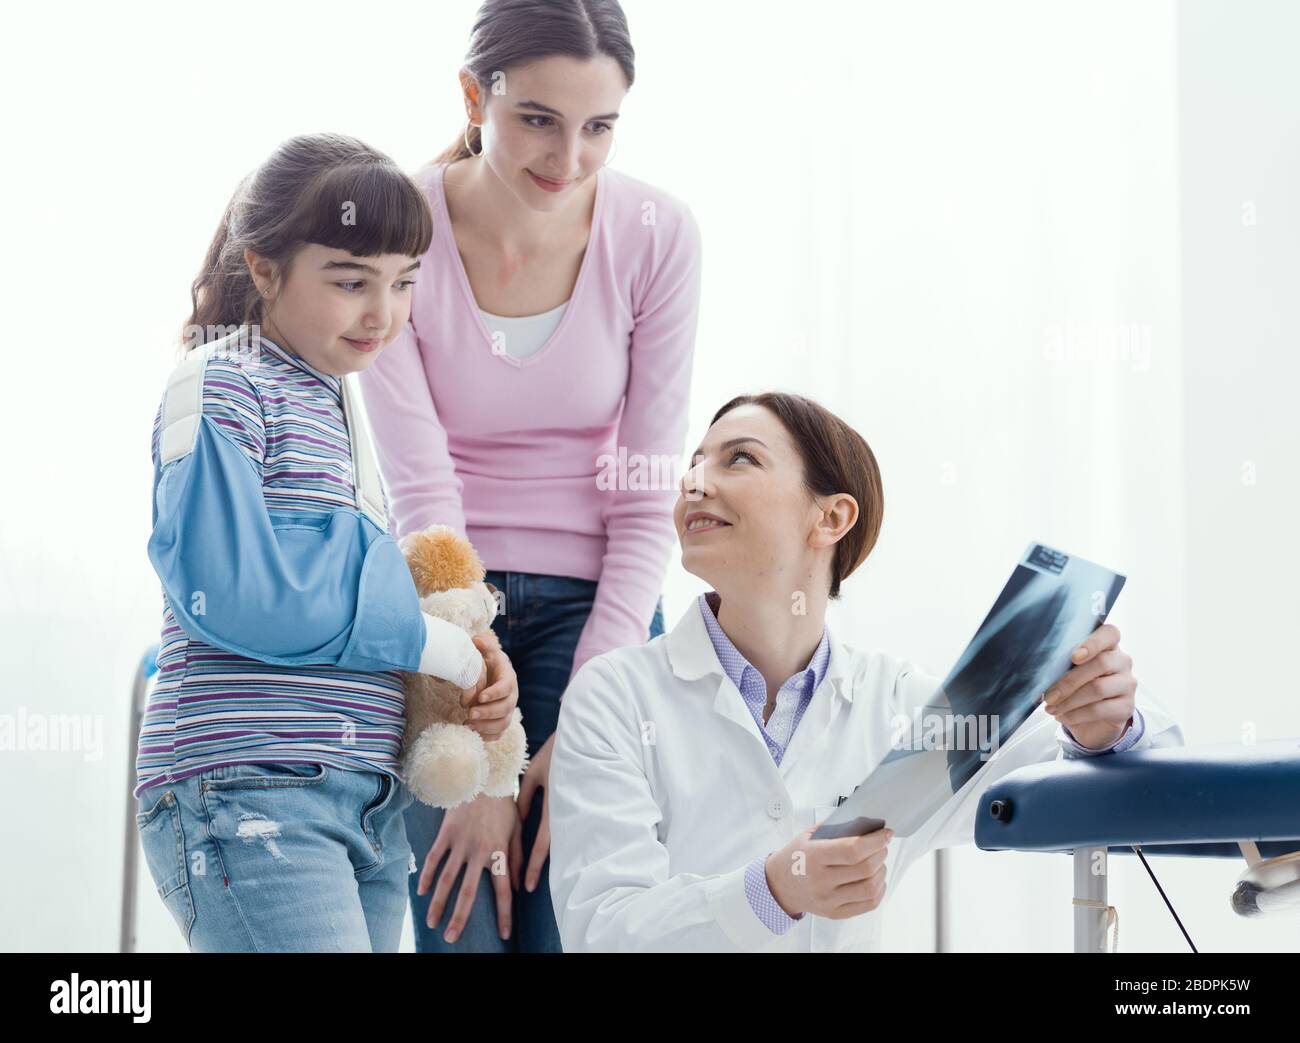 Friendly doctor showing an x-ray image of a broken bone to a young patient, the girl is wearing an arm brace Stock Photo